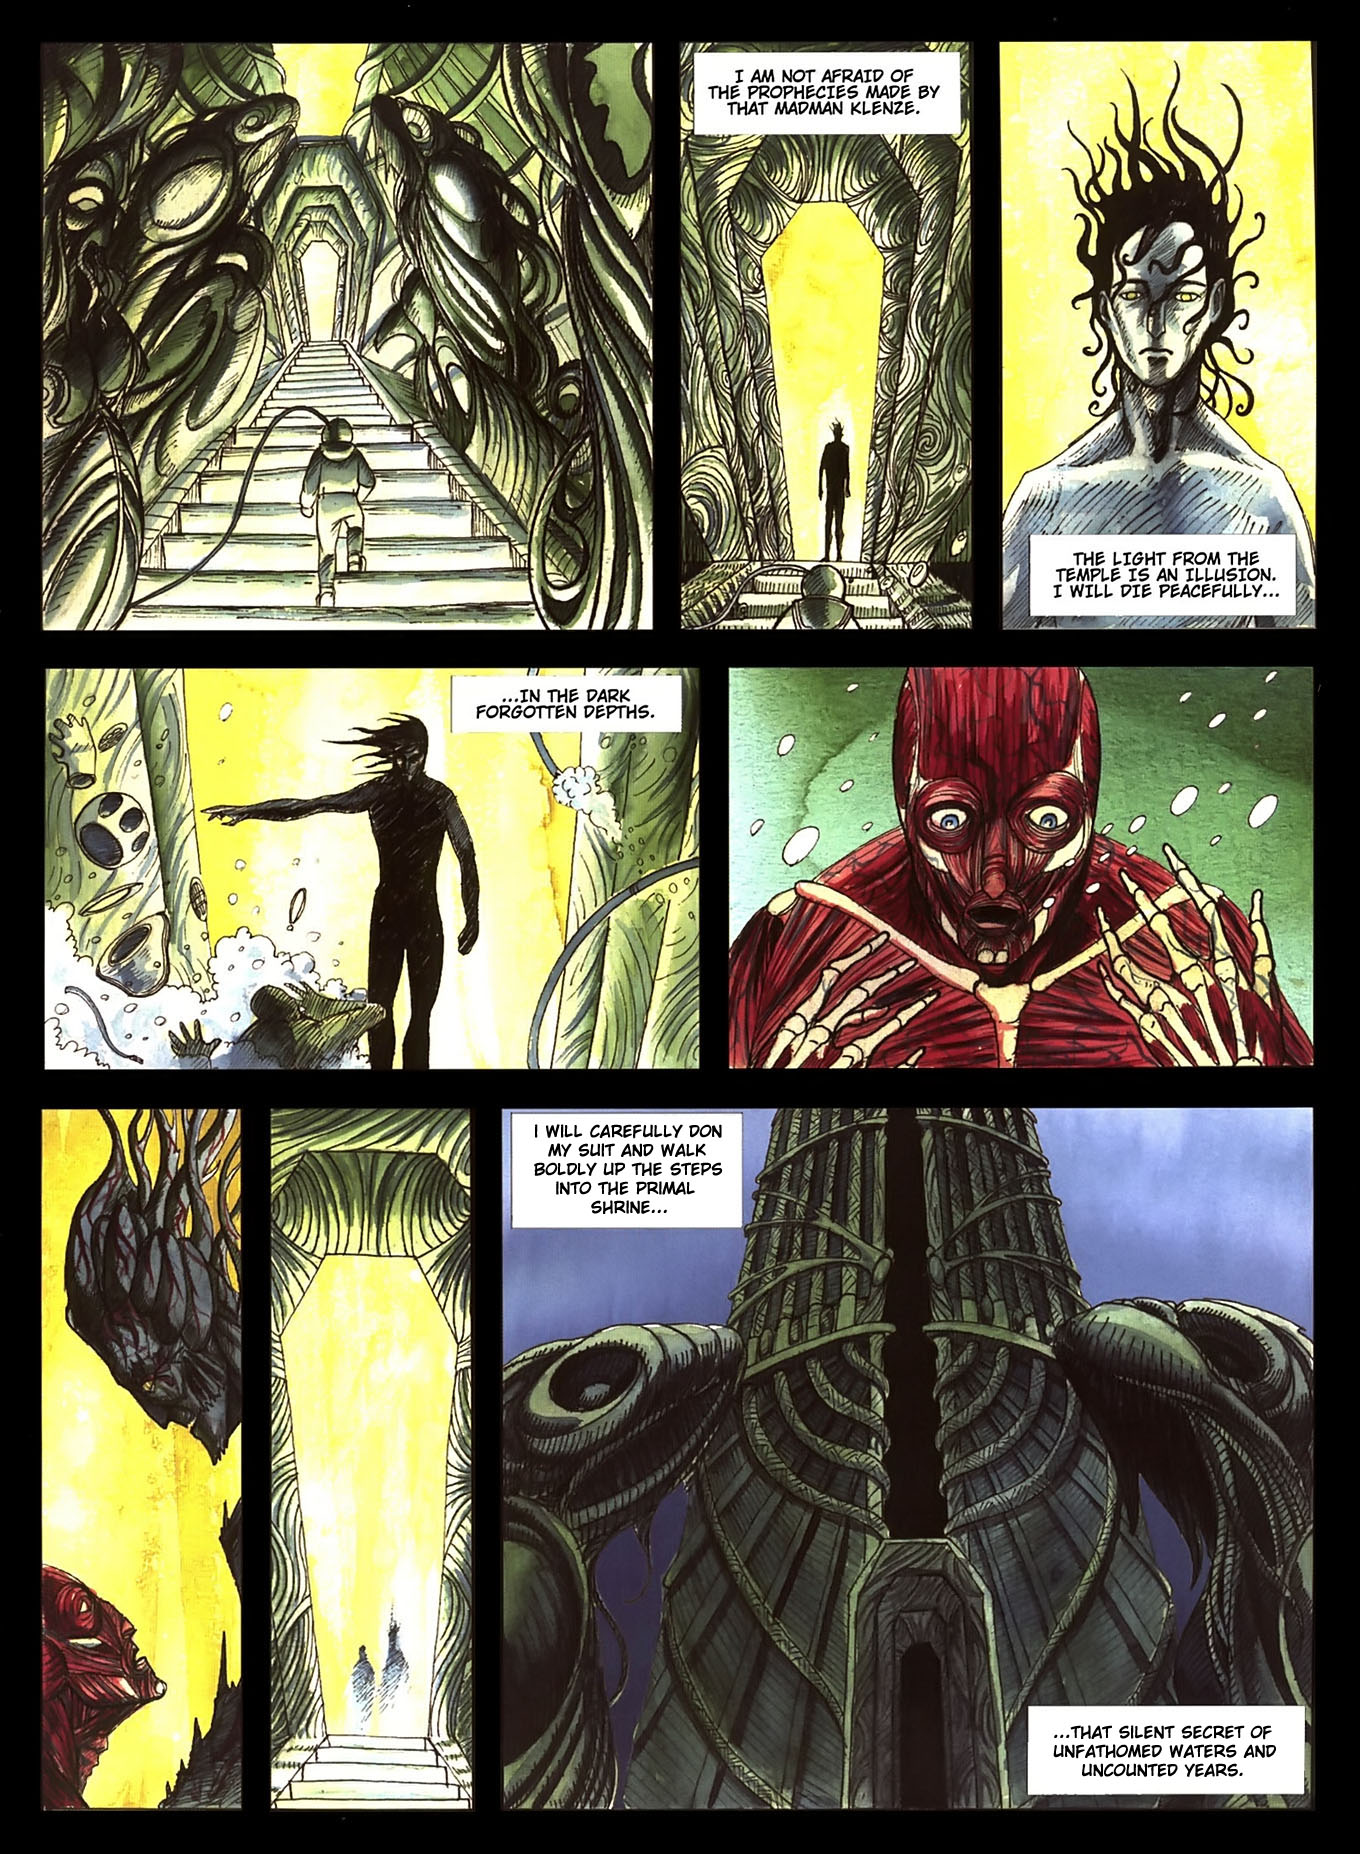 Read online H.P. Lovecraft - The Temple comic -  Issue # Full - 75